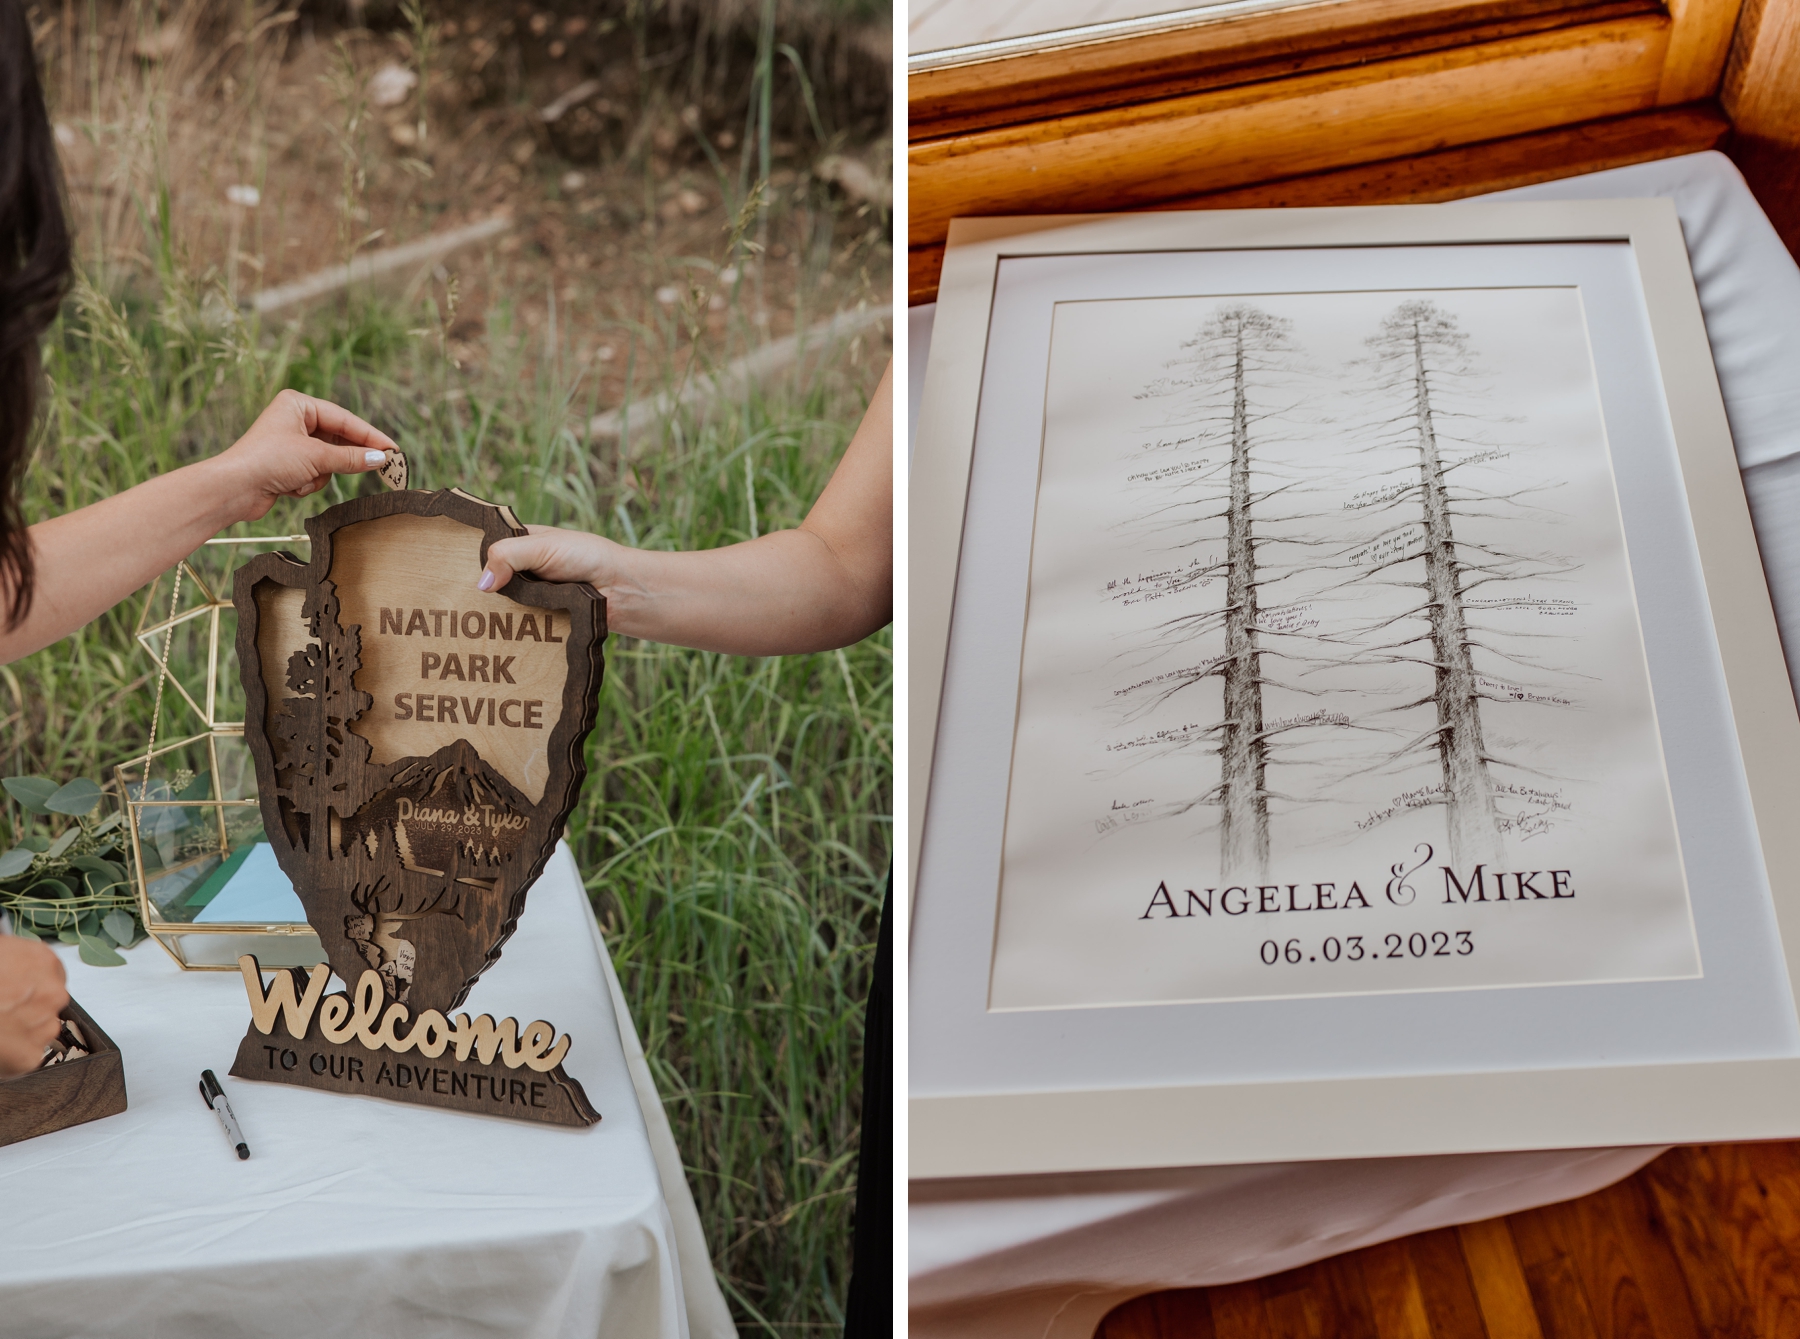 Guest placing signed wooden piece in National Park Service Guest book | Guest's signatures on tree branch art